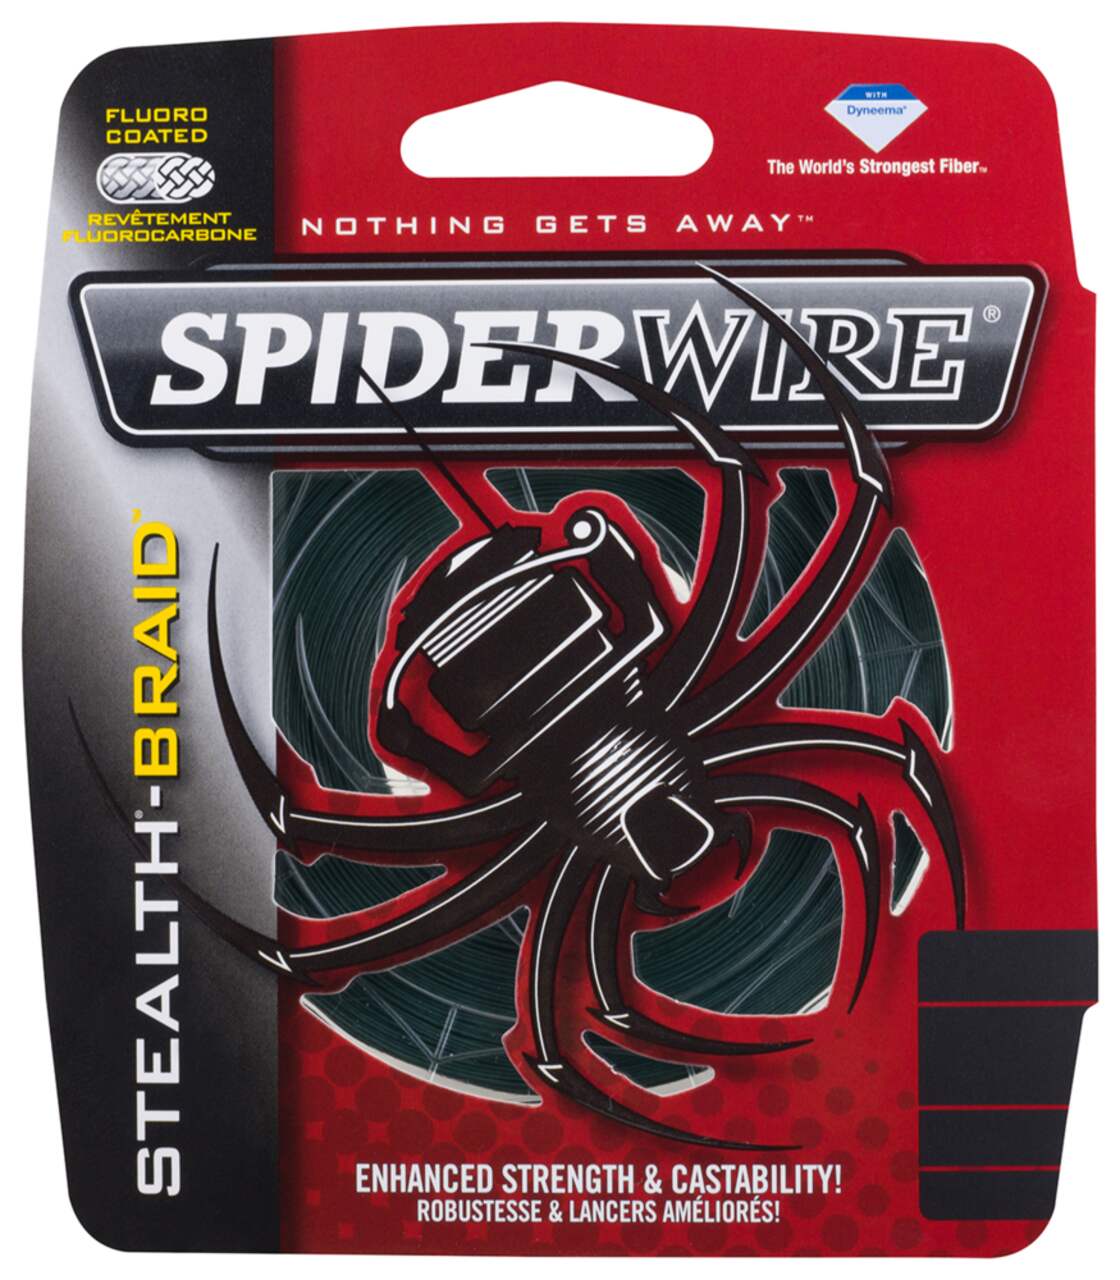 https://media-www.canadiantire.ca/product/playing/fishing/fishing-accessories/0771186/spiderwire-stealth-moss-green-100lb-250-yards-3385fae9-52fb-467f-9eed-79e9d118c7d6.png?imdensity=1&imwidth=640&impolicy=mZoom